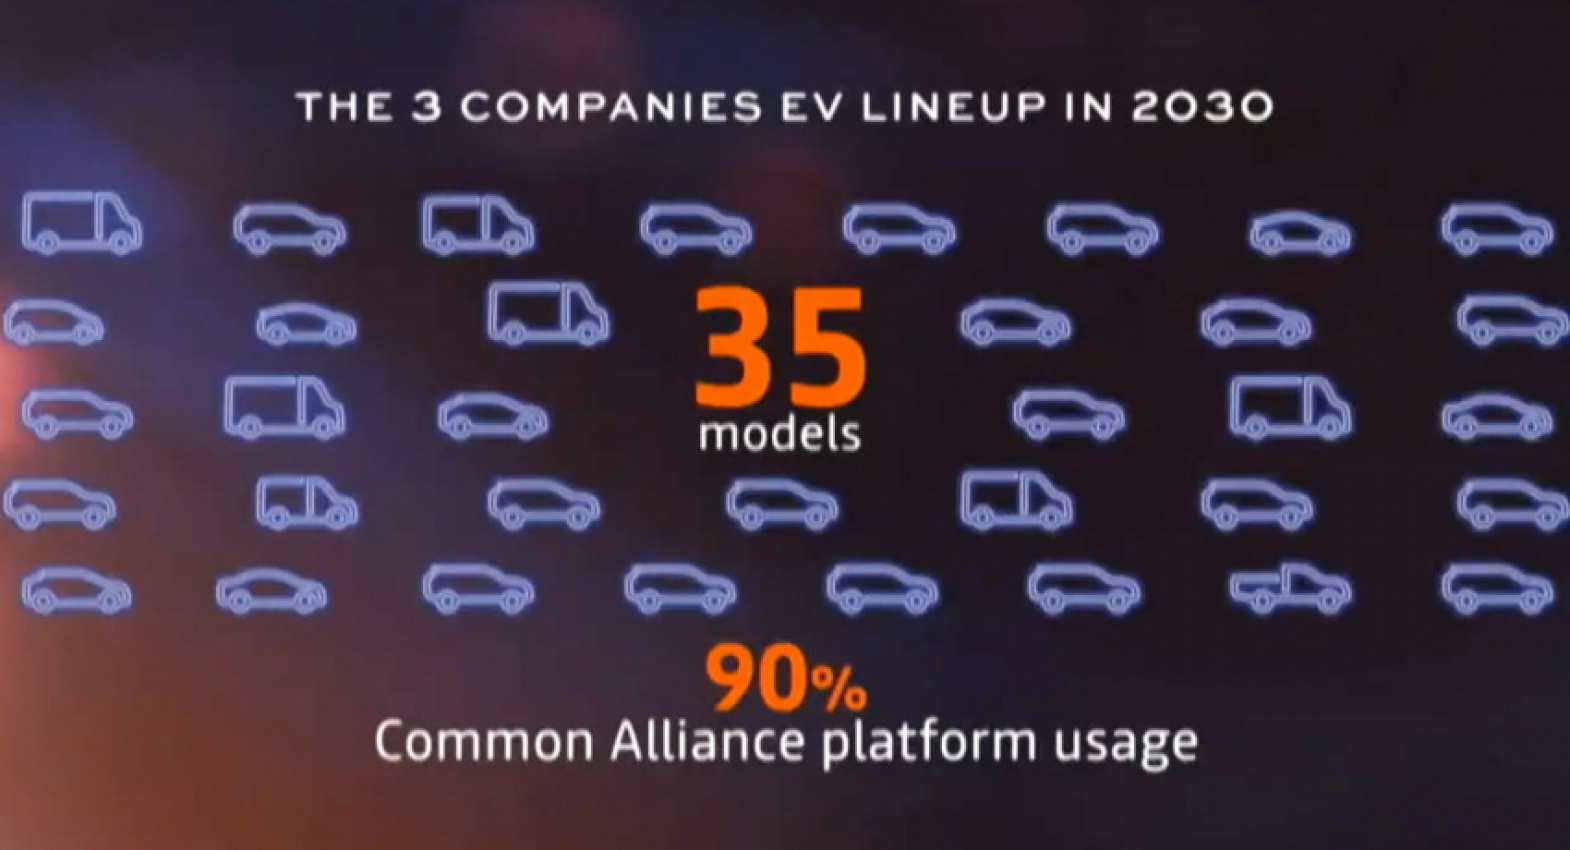 autos, cars, mitsubishi, news, nissan, renault, electric vehicles, industry, mitsubishi videos, nissan videos, renault videos, video, renault-nissan-mitsubishi alliance to unveil 35 new evs by 2030